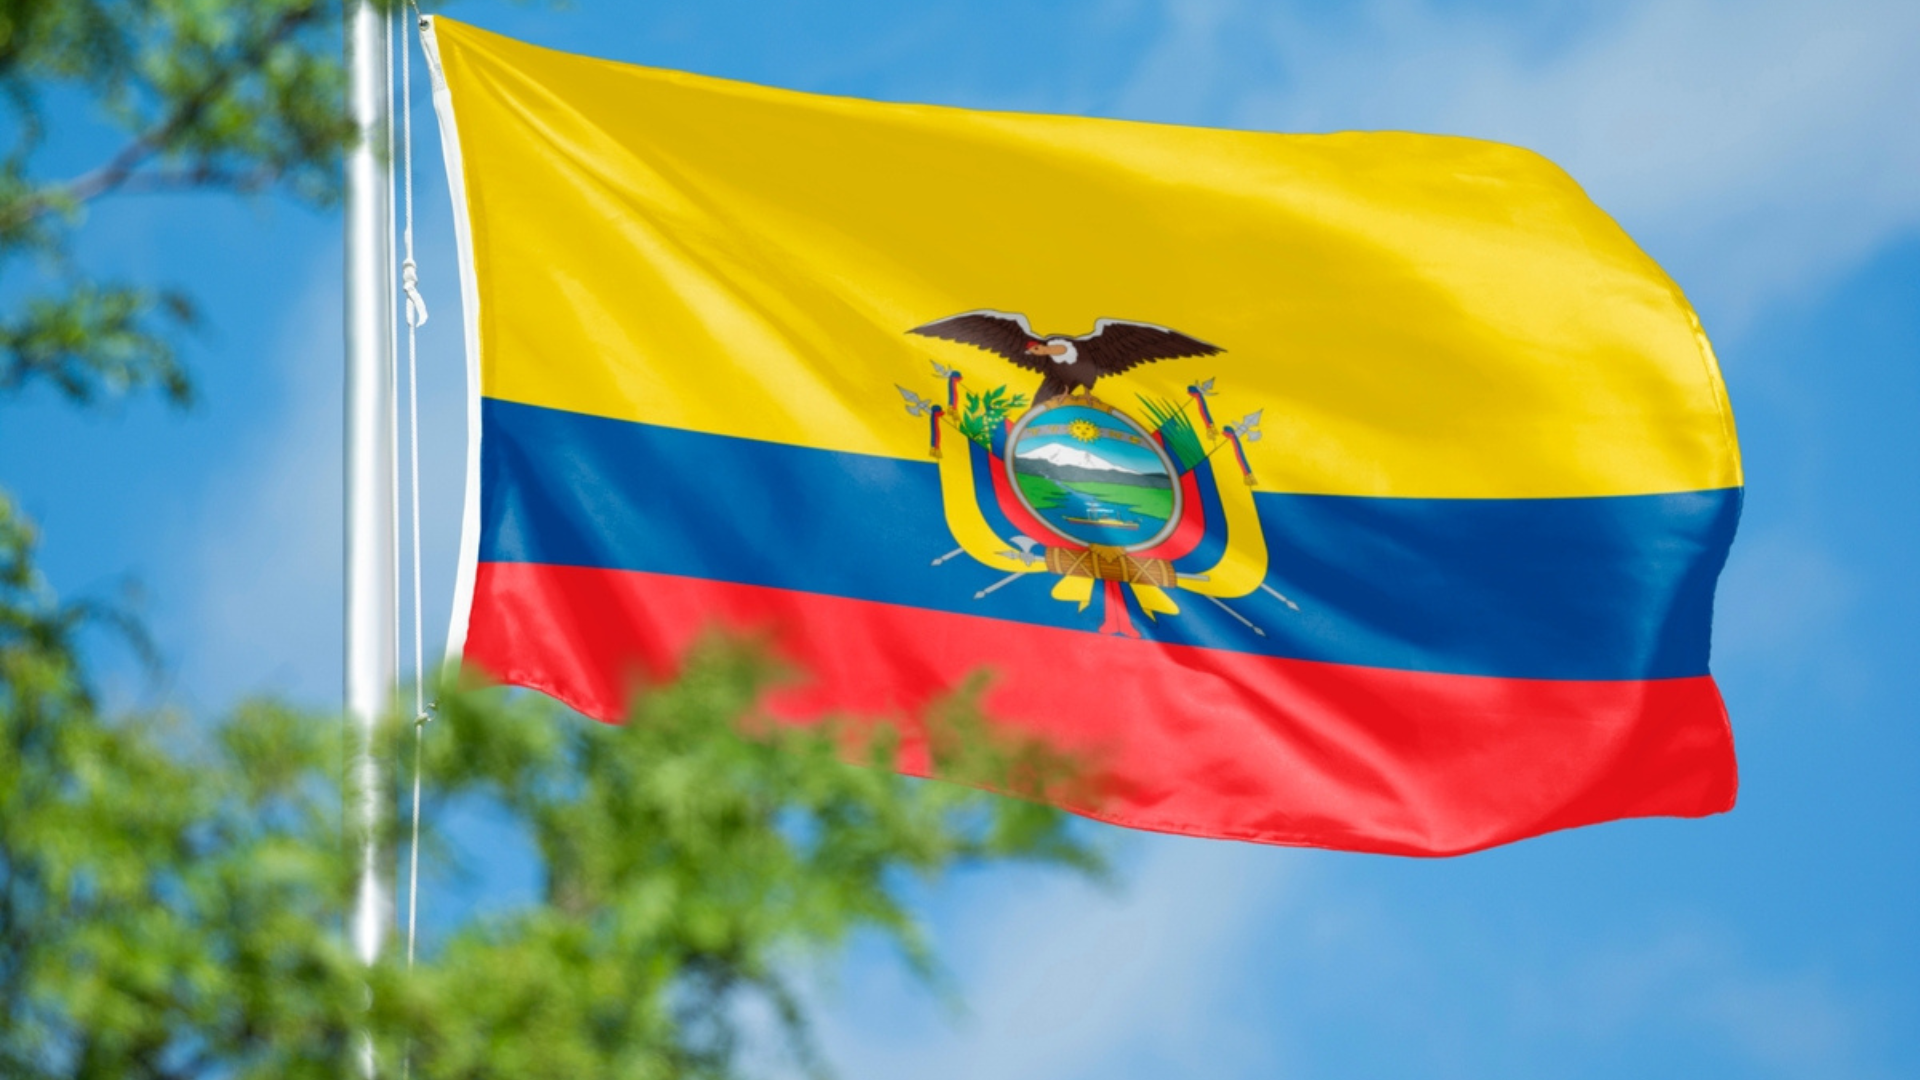 The flag of Ecuador blowing in the wind